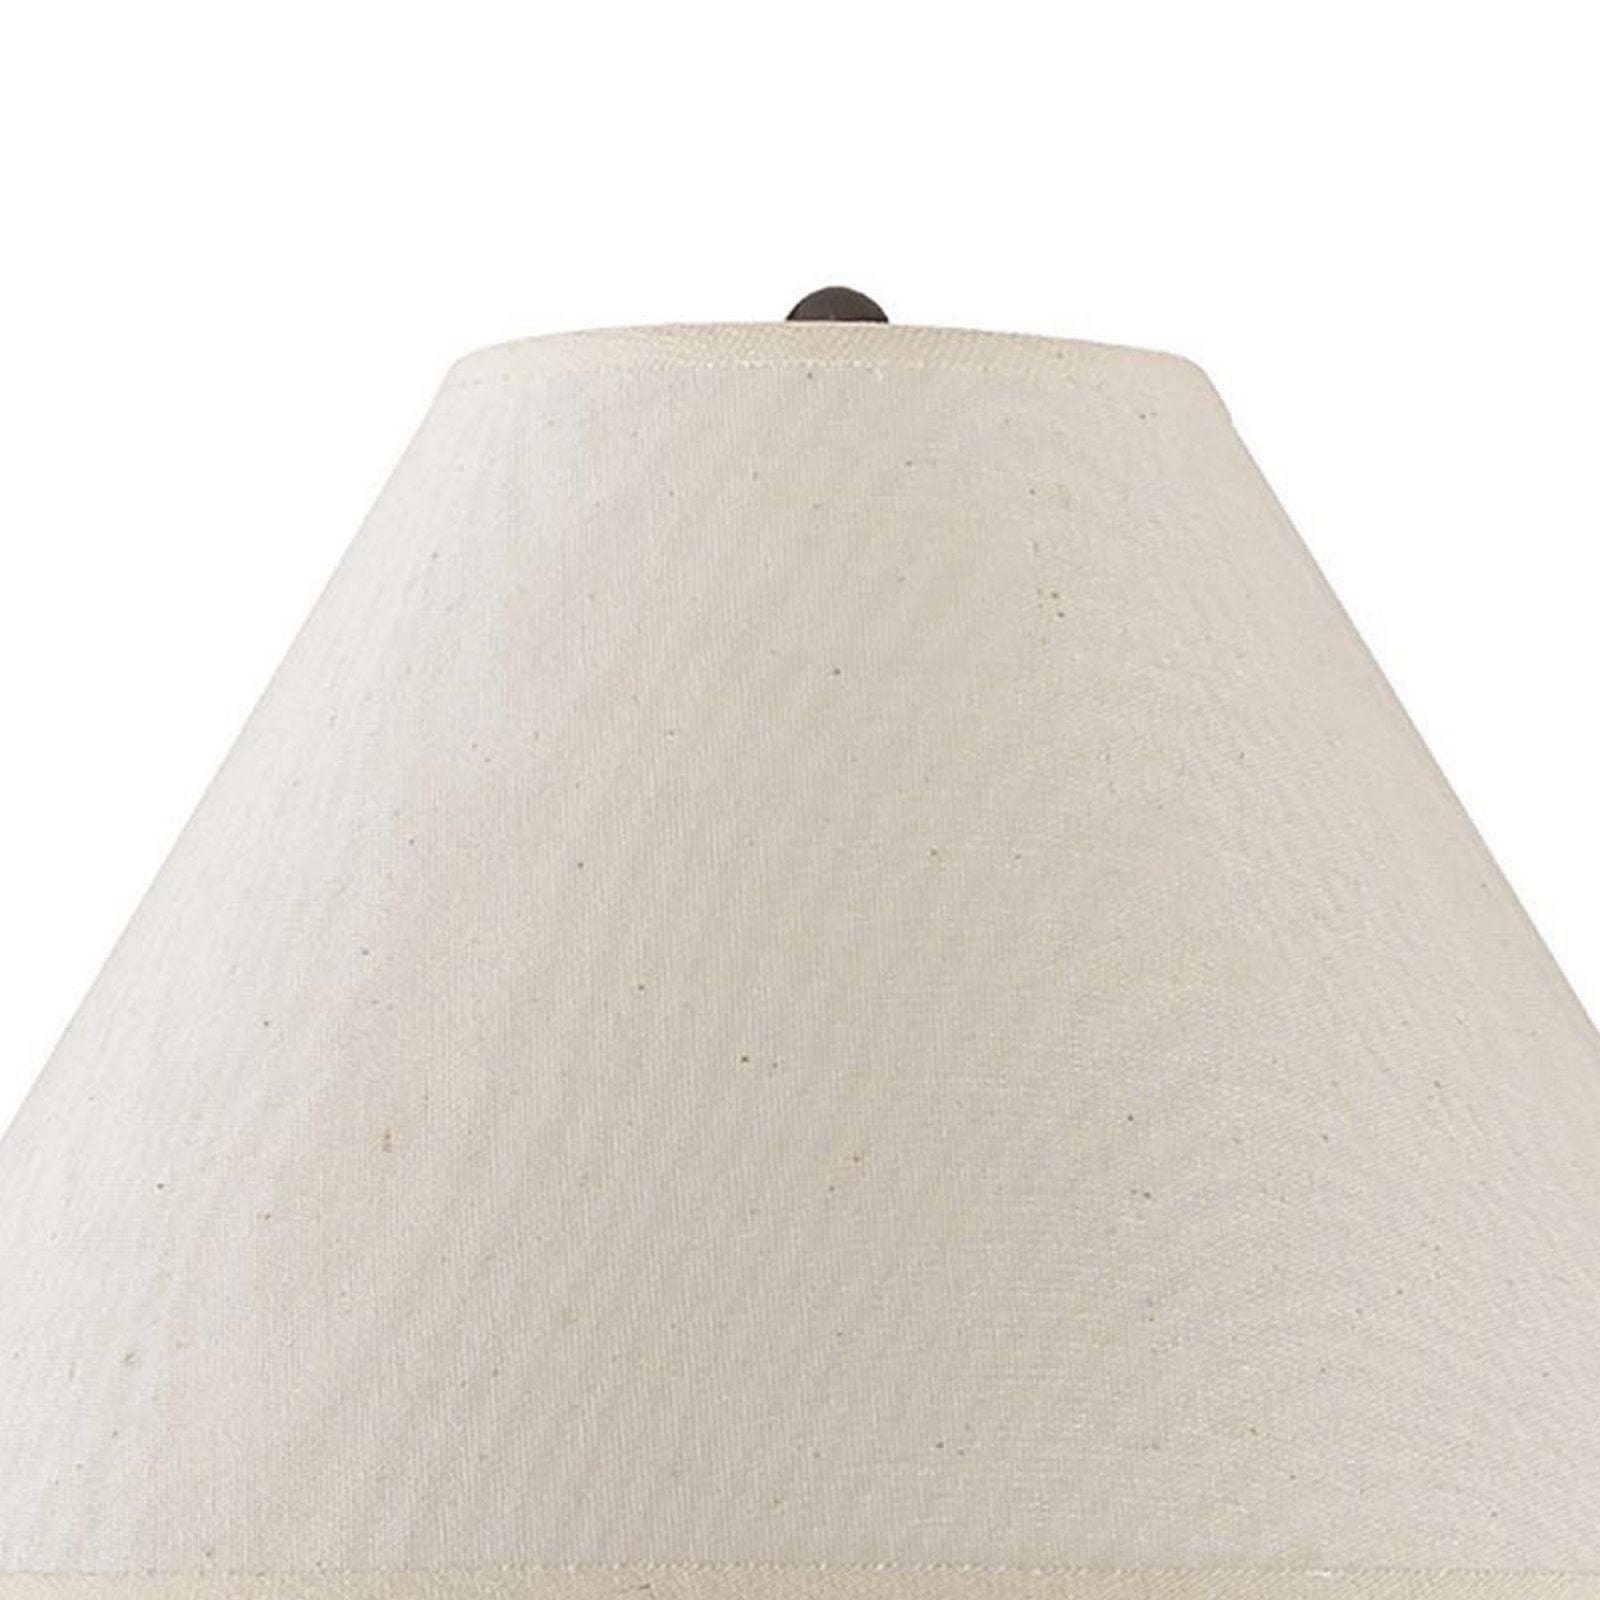 Benzara 60 Watt Metal Swing Arm Wall Lamp With Tapered Shade, Off White And Bronze By Benzara Wall Lamps BM220648